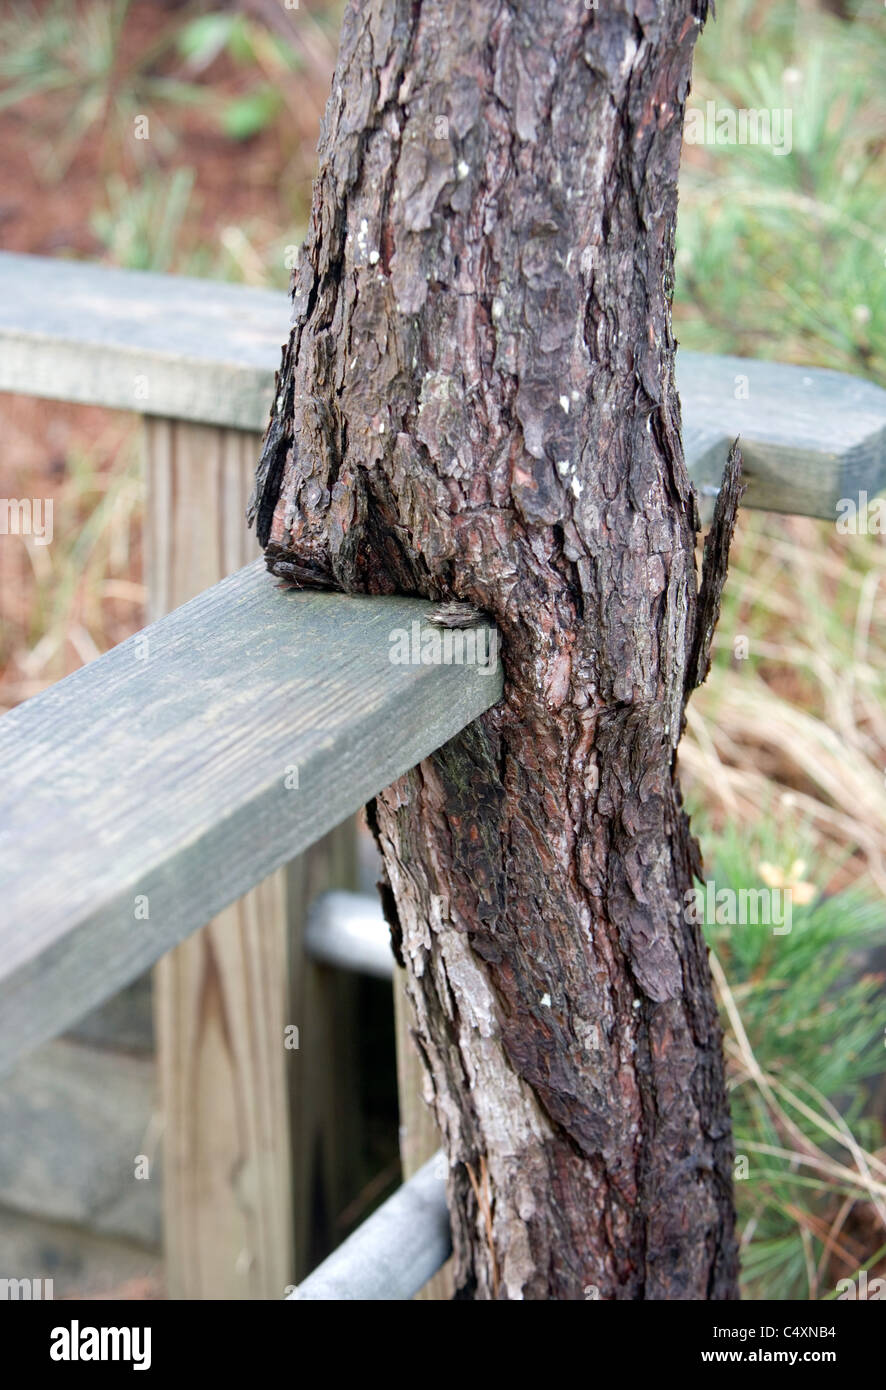 A pine tree that has grown over and around a wooden railing Stock Photo